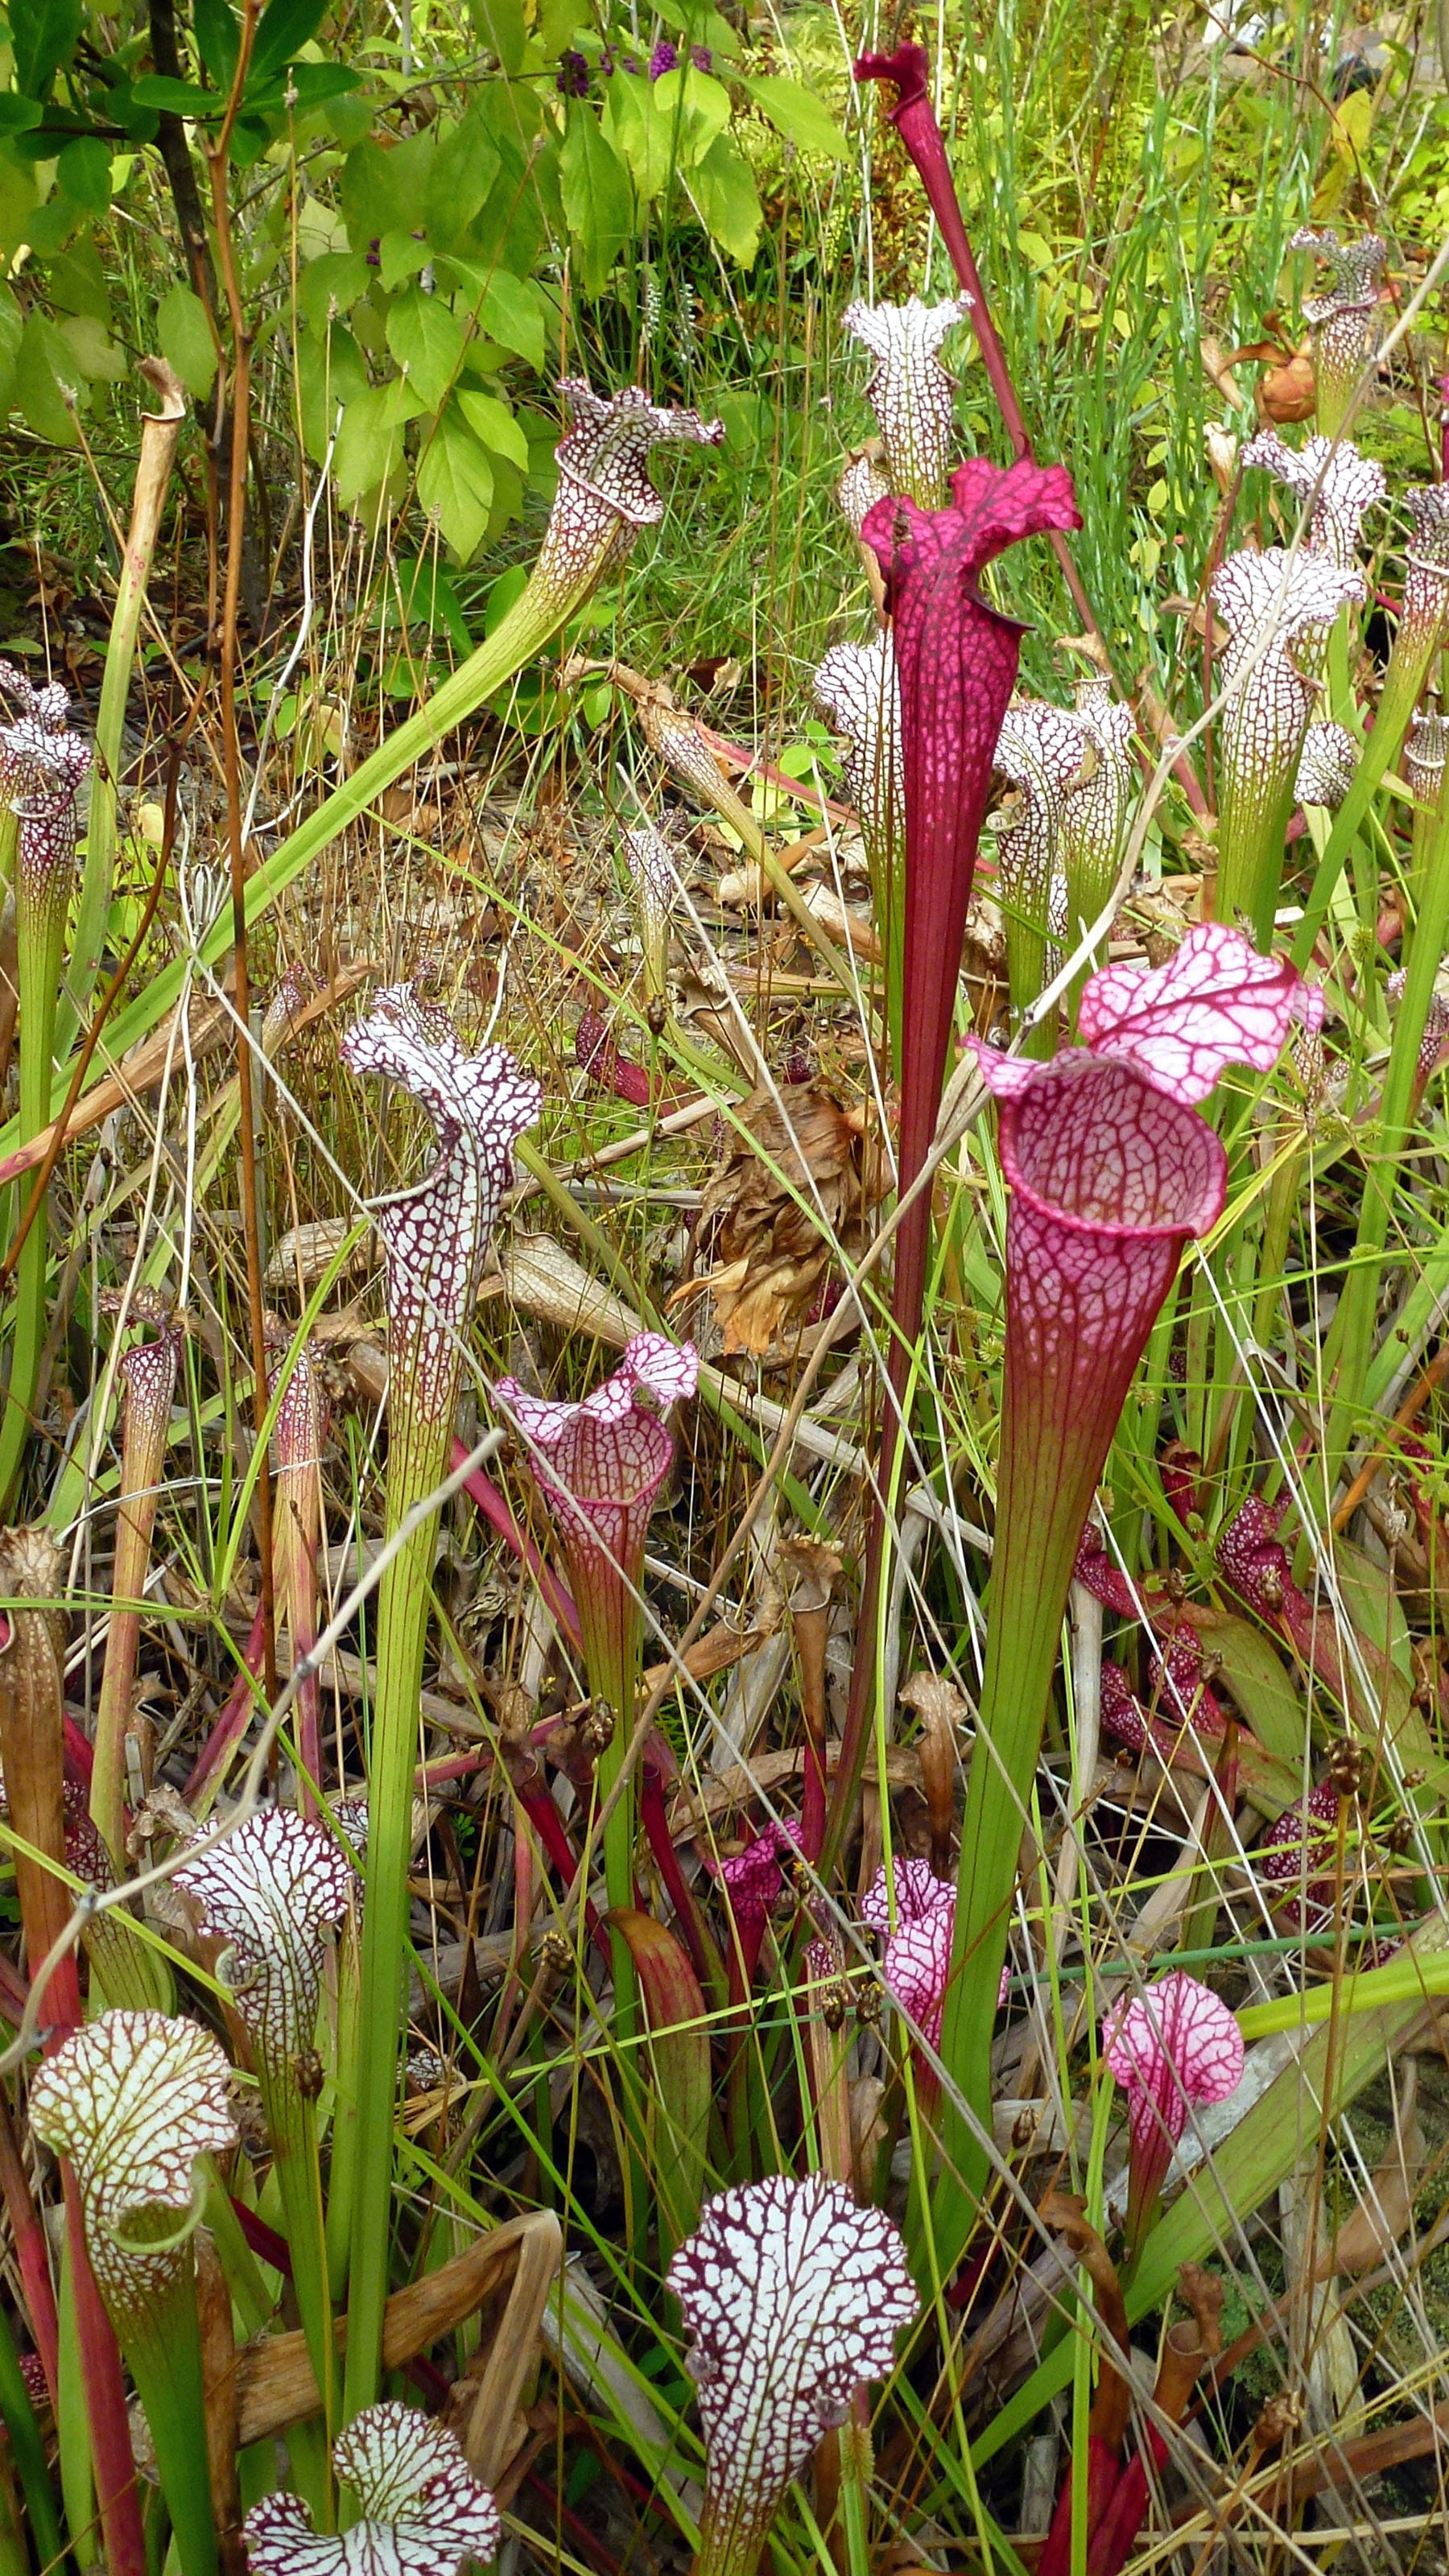 Red and white pitcher plants growing from a bog in a greenhouse.